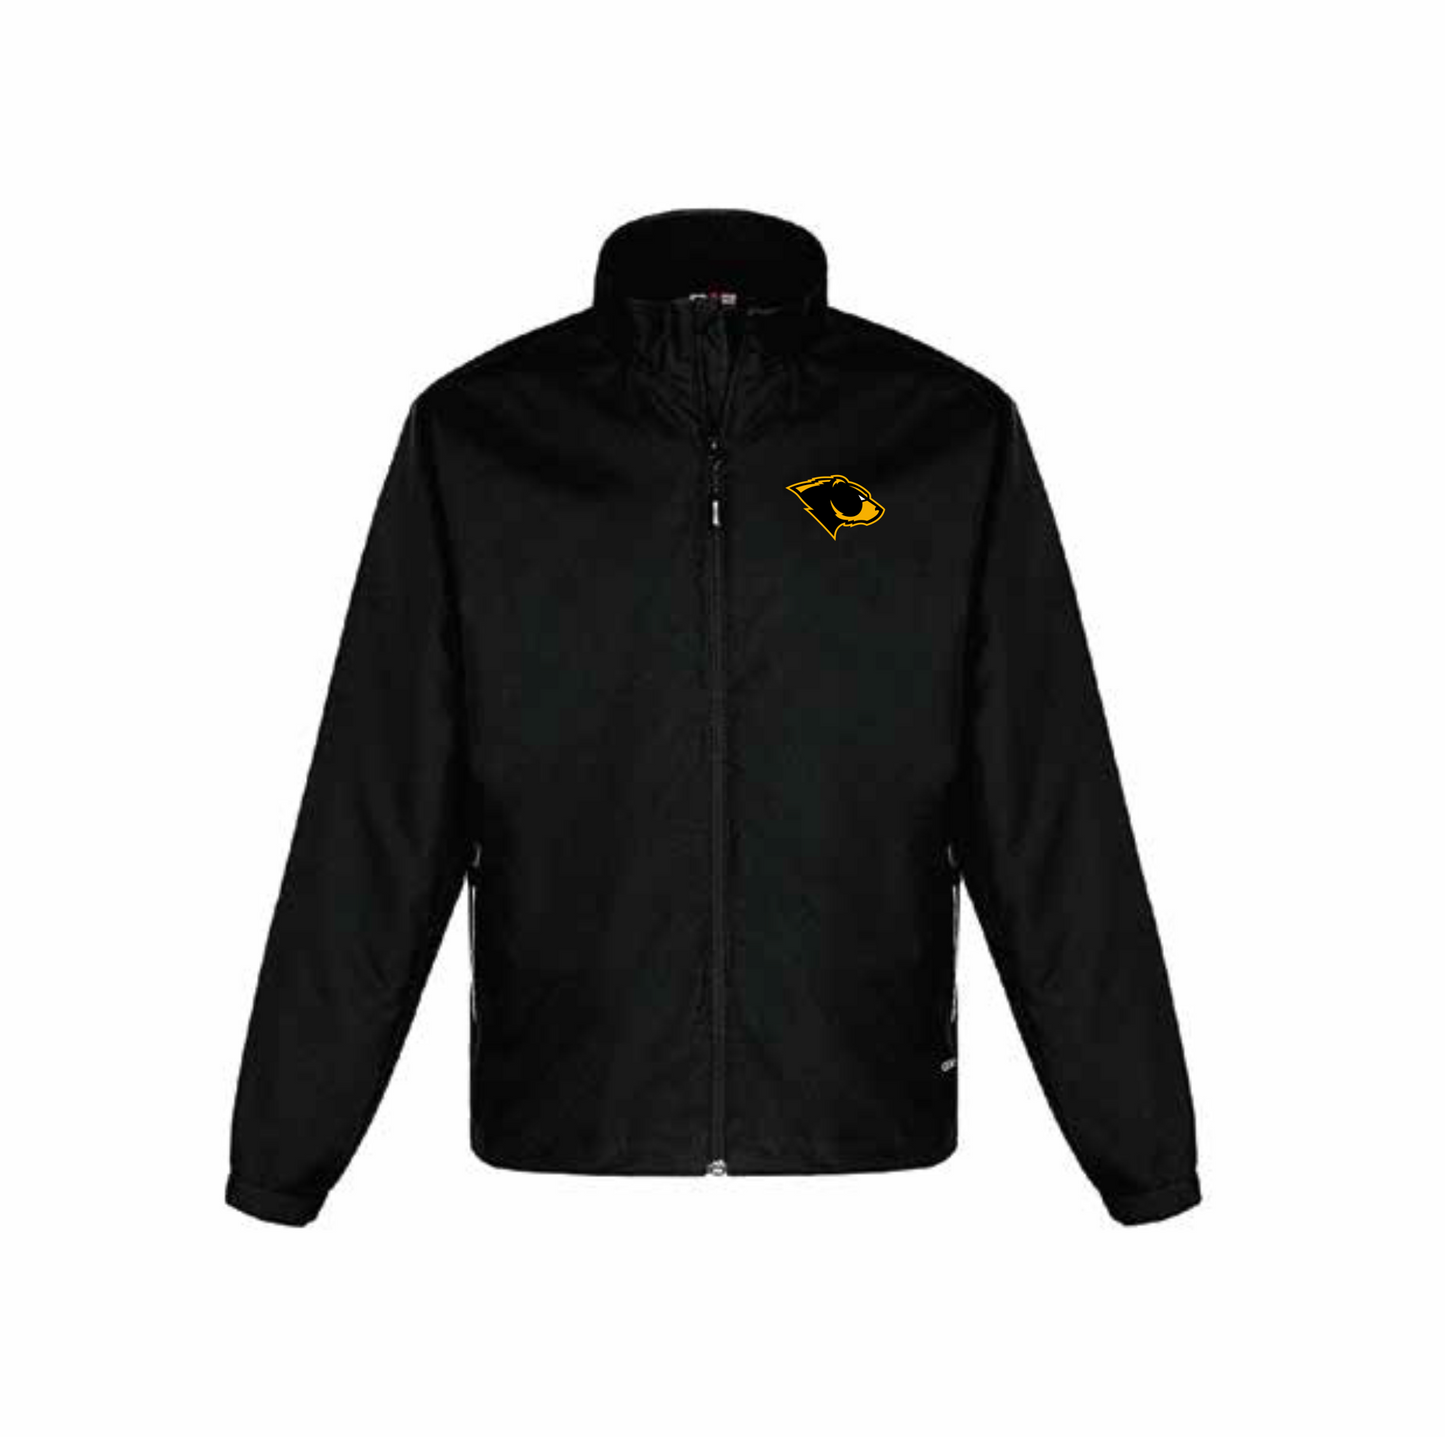 ORDER BY OCT 6th, Ships week of NOV 7th - Oakland Bears Triumph Skate Jacket - Youth